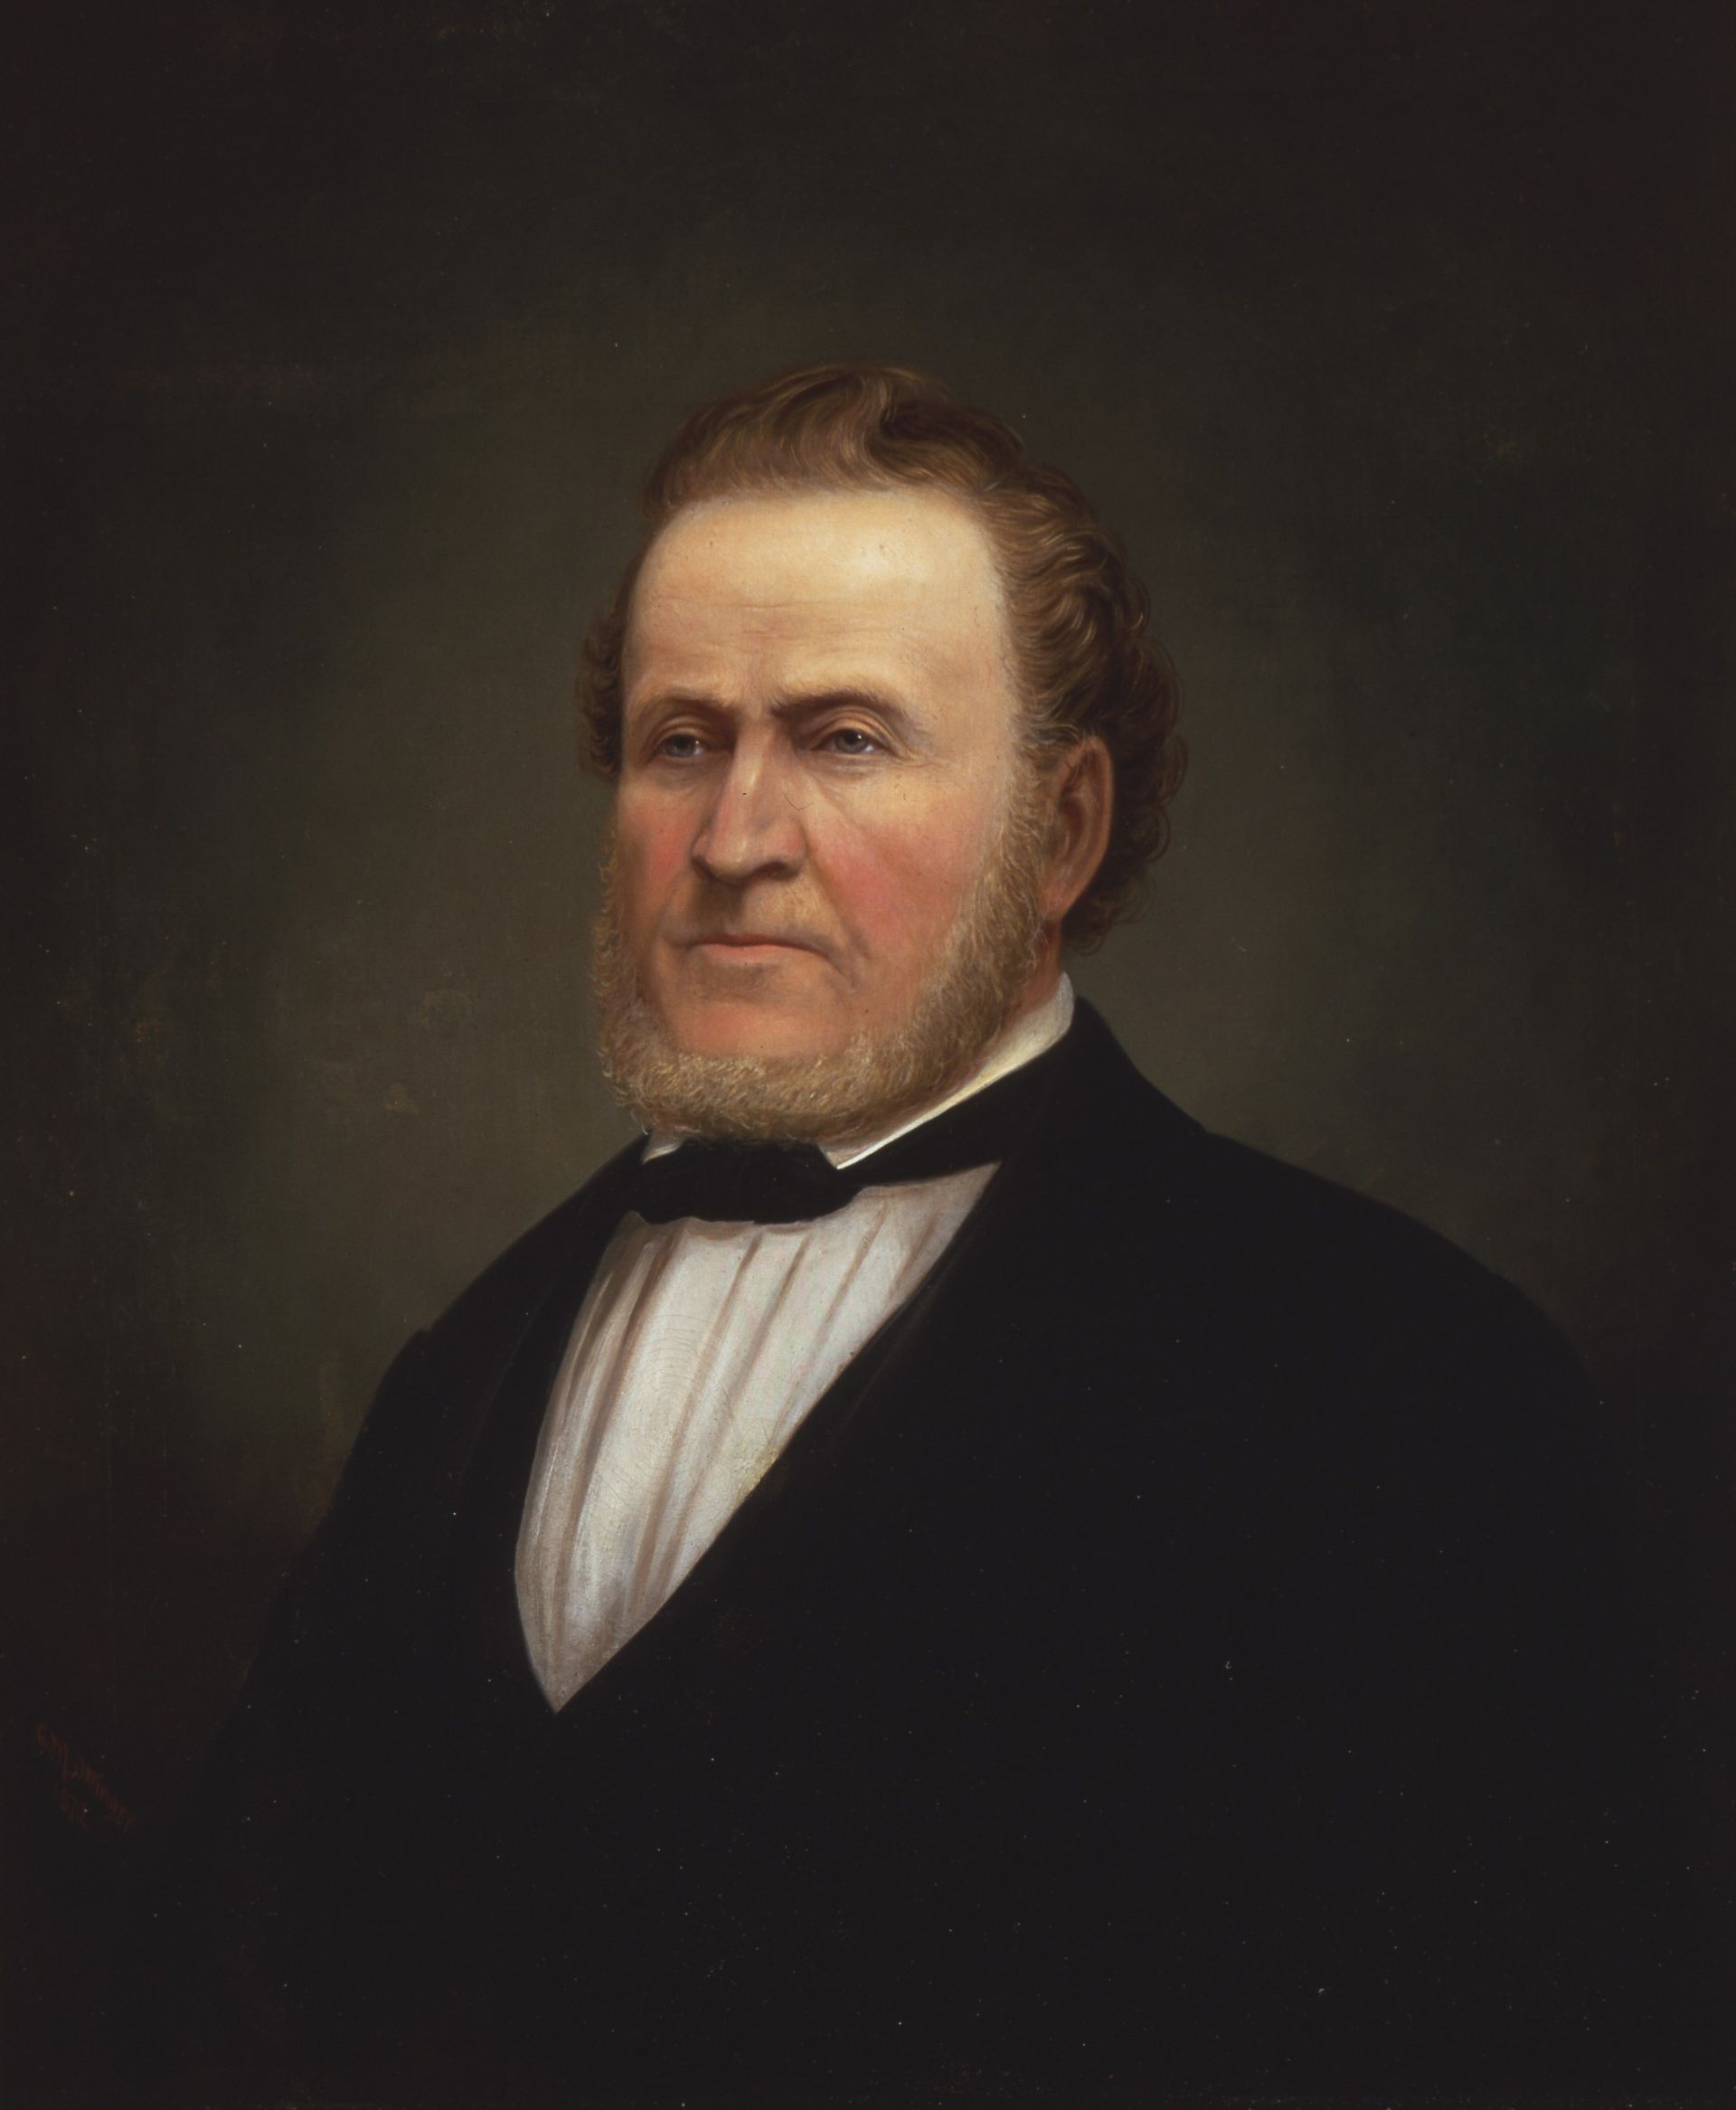 Brigham Young, by George Martin Ottinger